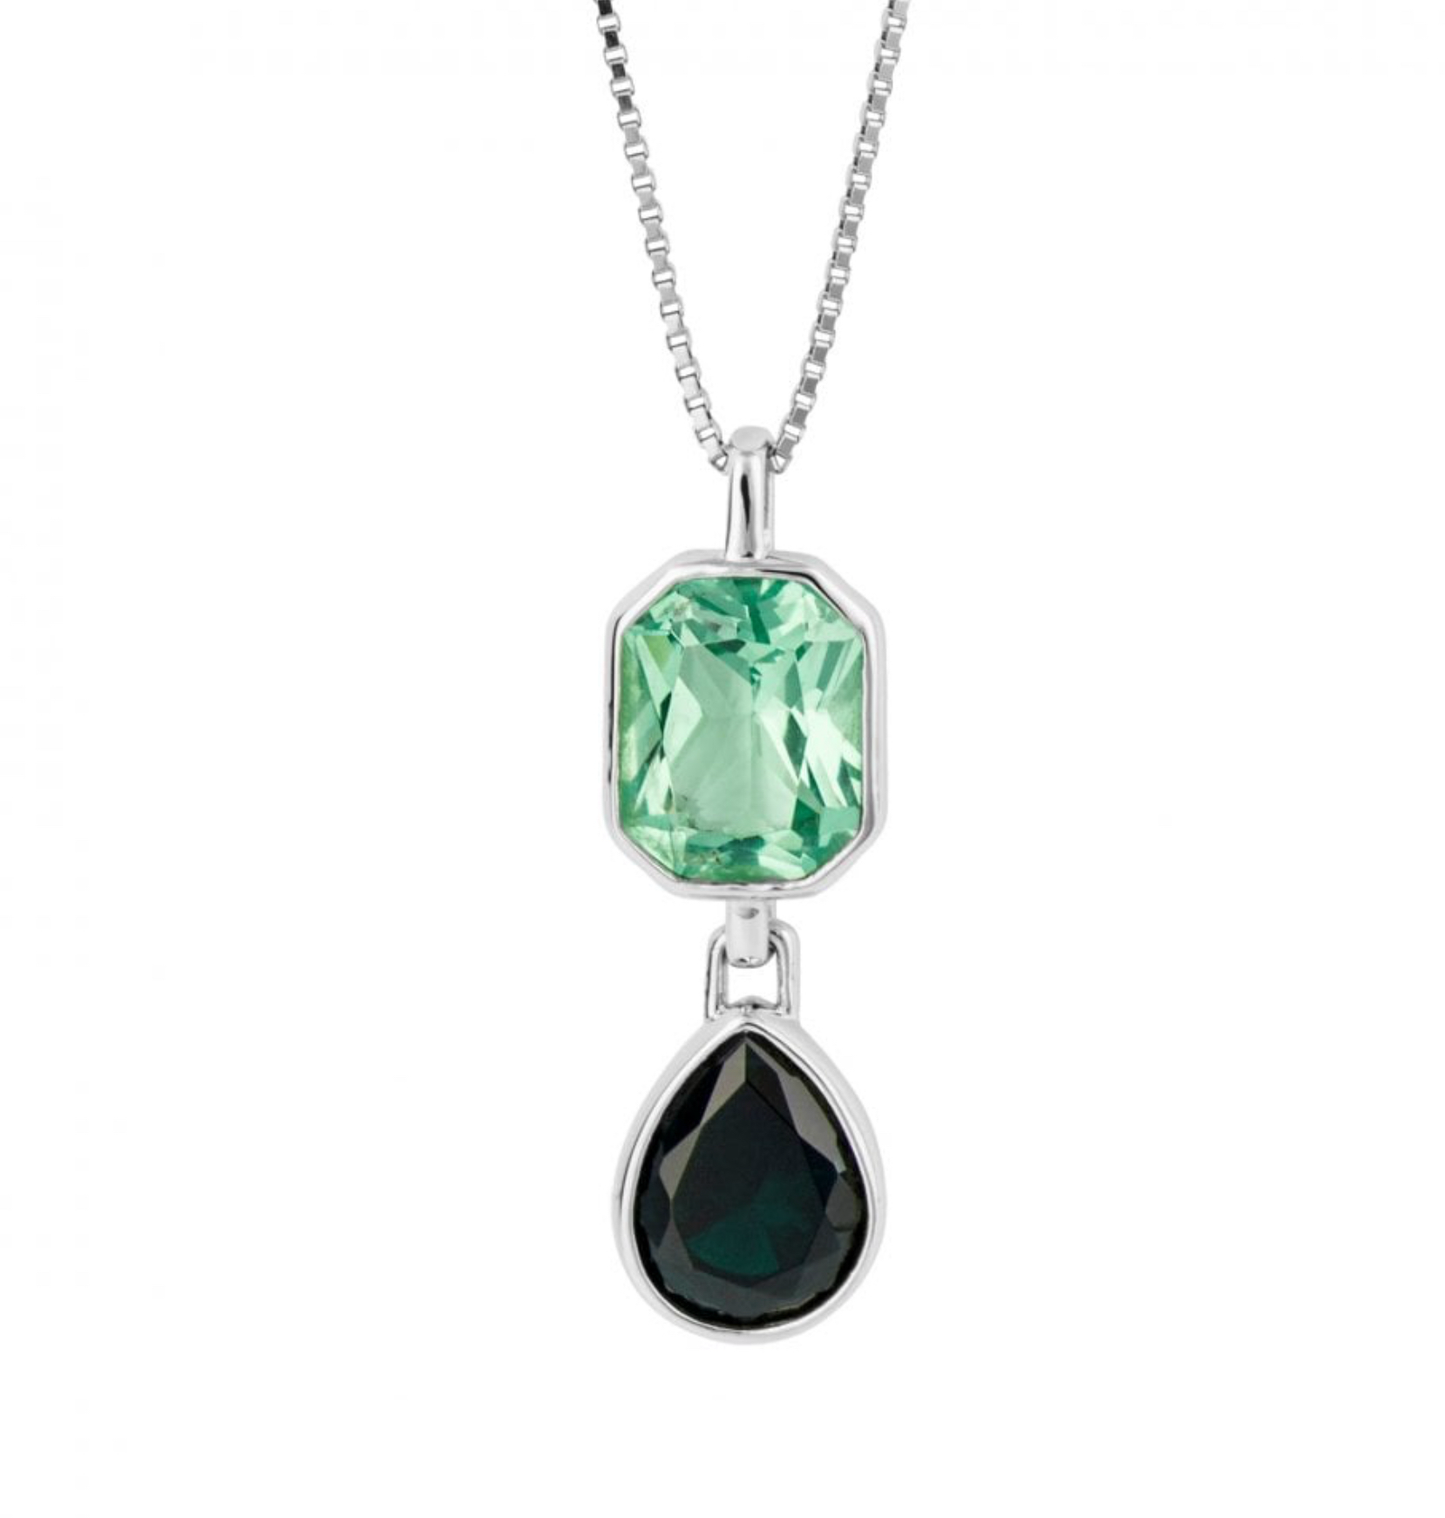 Fiorelli green and black coloured octagonal and teardrop shaped double crystal necklace